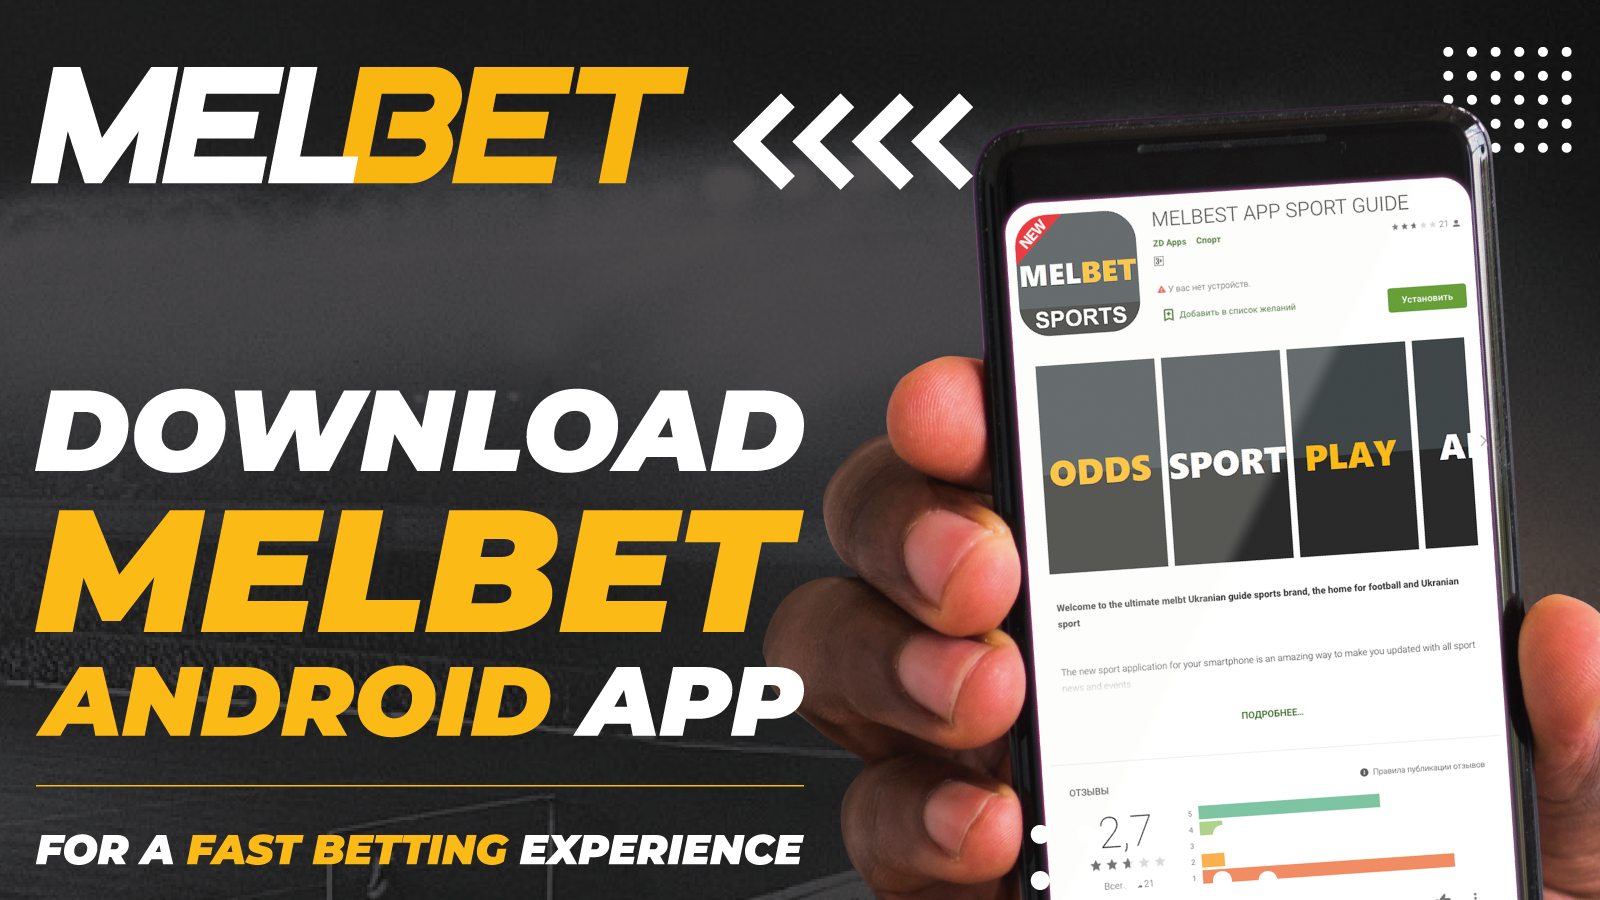 Do you have to download the application to play at Melbet?